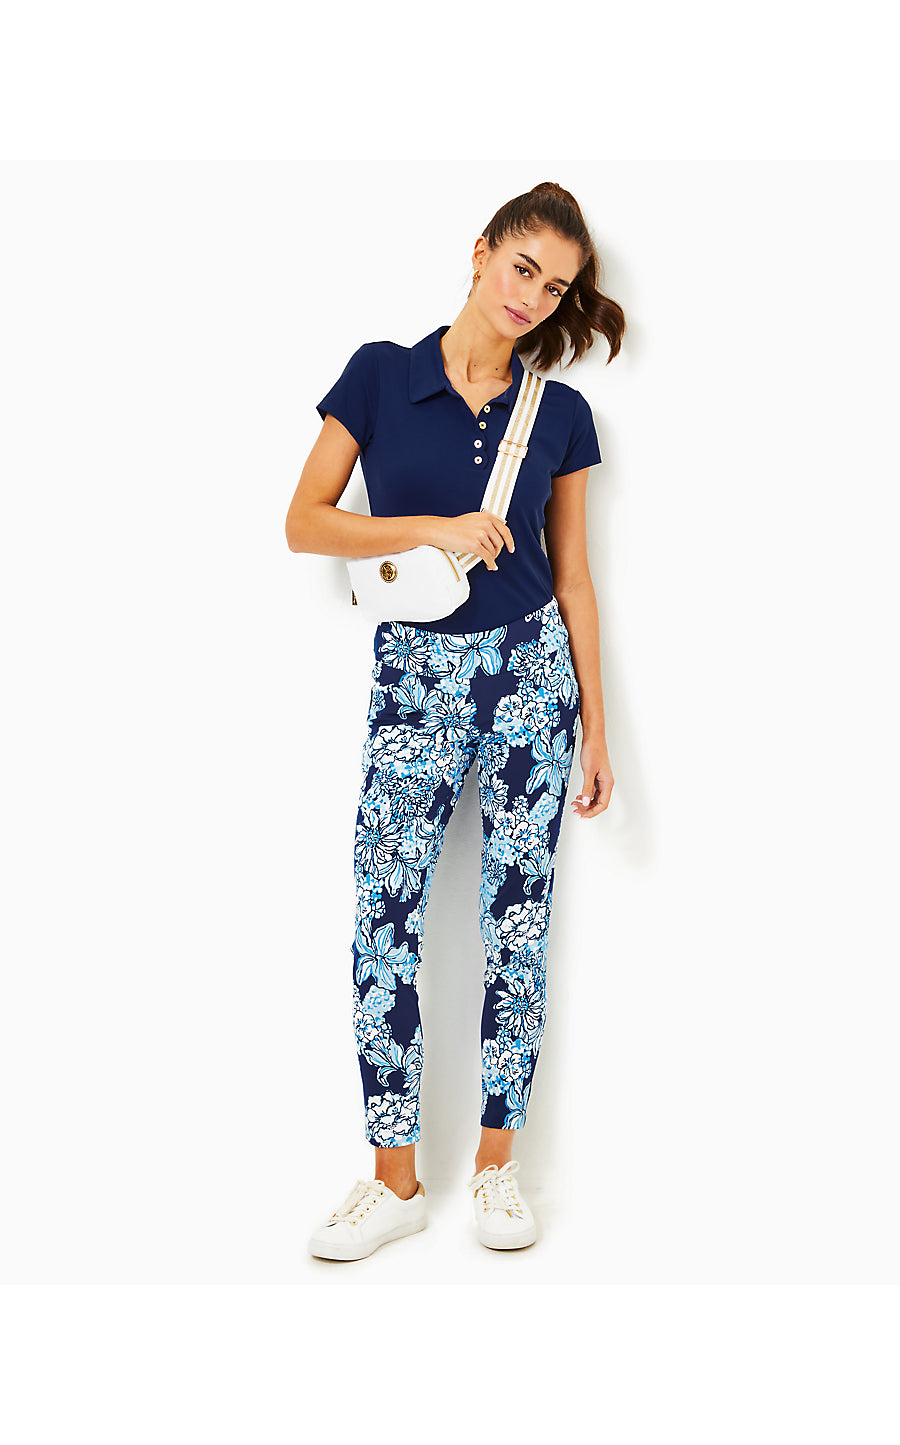 CORSO PANT UPF 50+, LOW TIDE NAVY BOUQUET ALL DAY GOLF